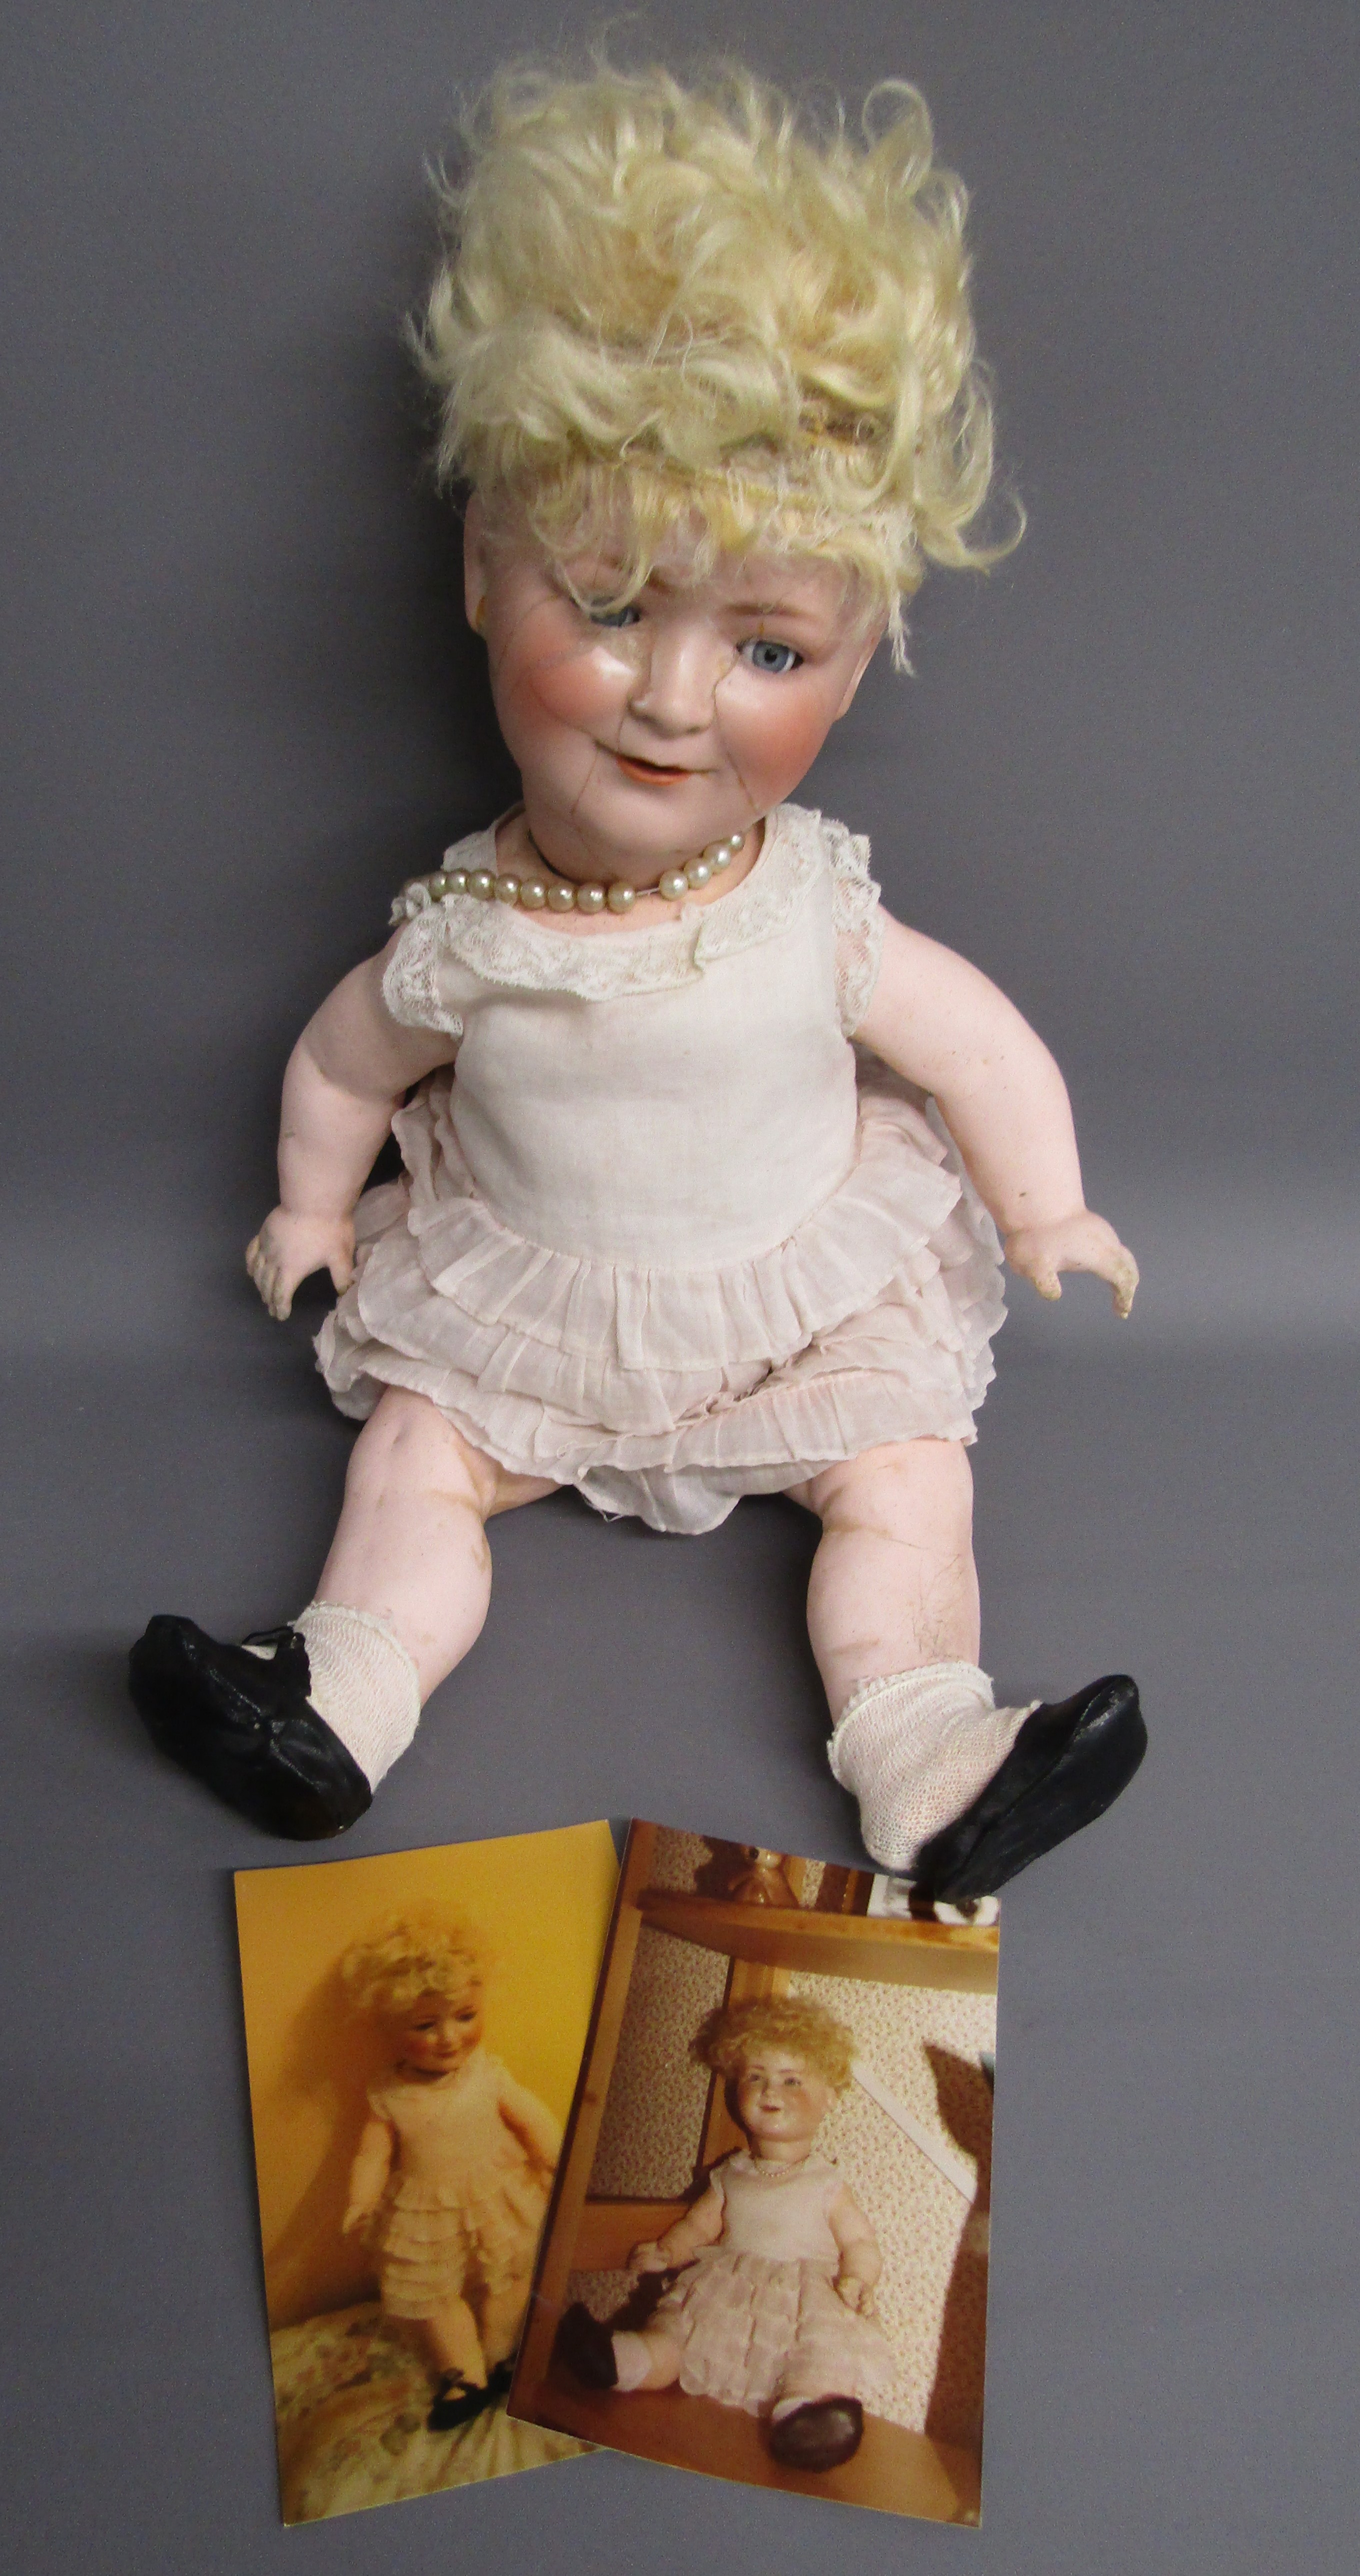 Schoenau and Hoffmeister bisque head 'Princess Elizabeth' doll with original frilly dress and